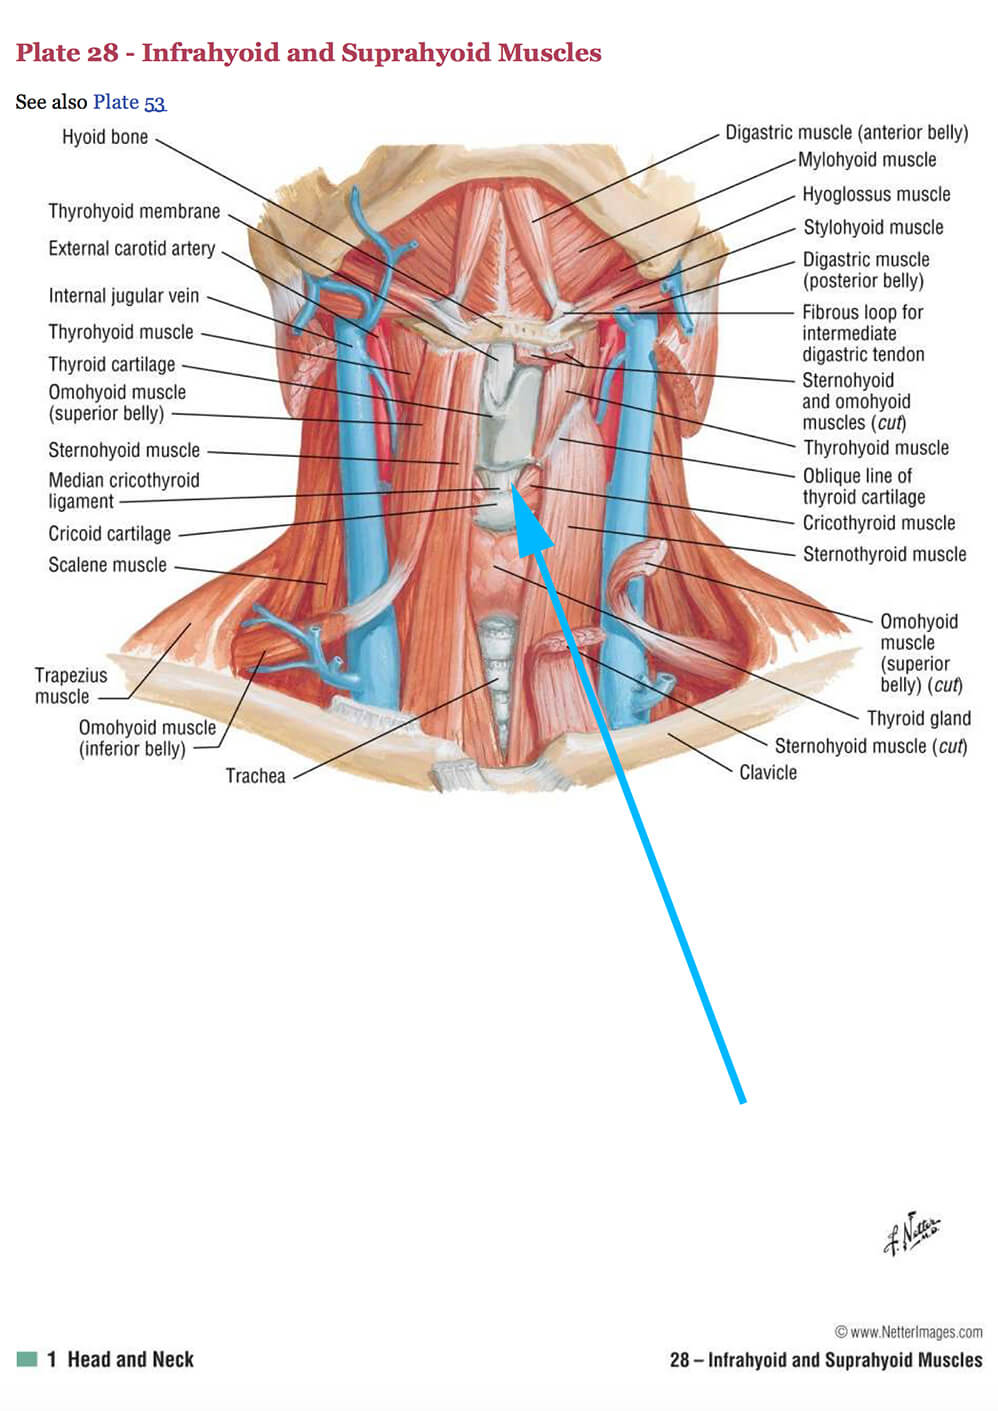 Anatomy of the Neck and Location of Thyroid Cartilage in Chondrolaryngoplasty